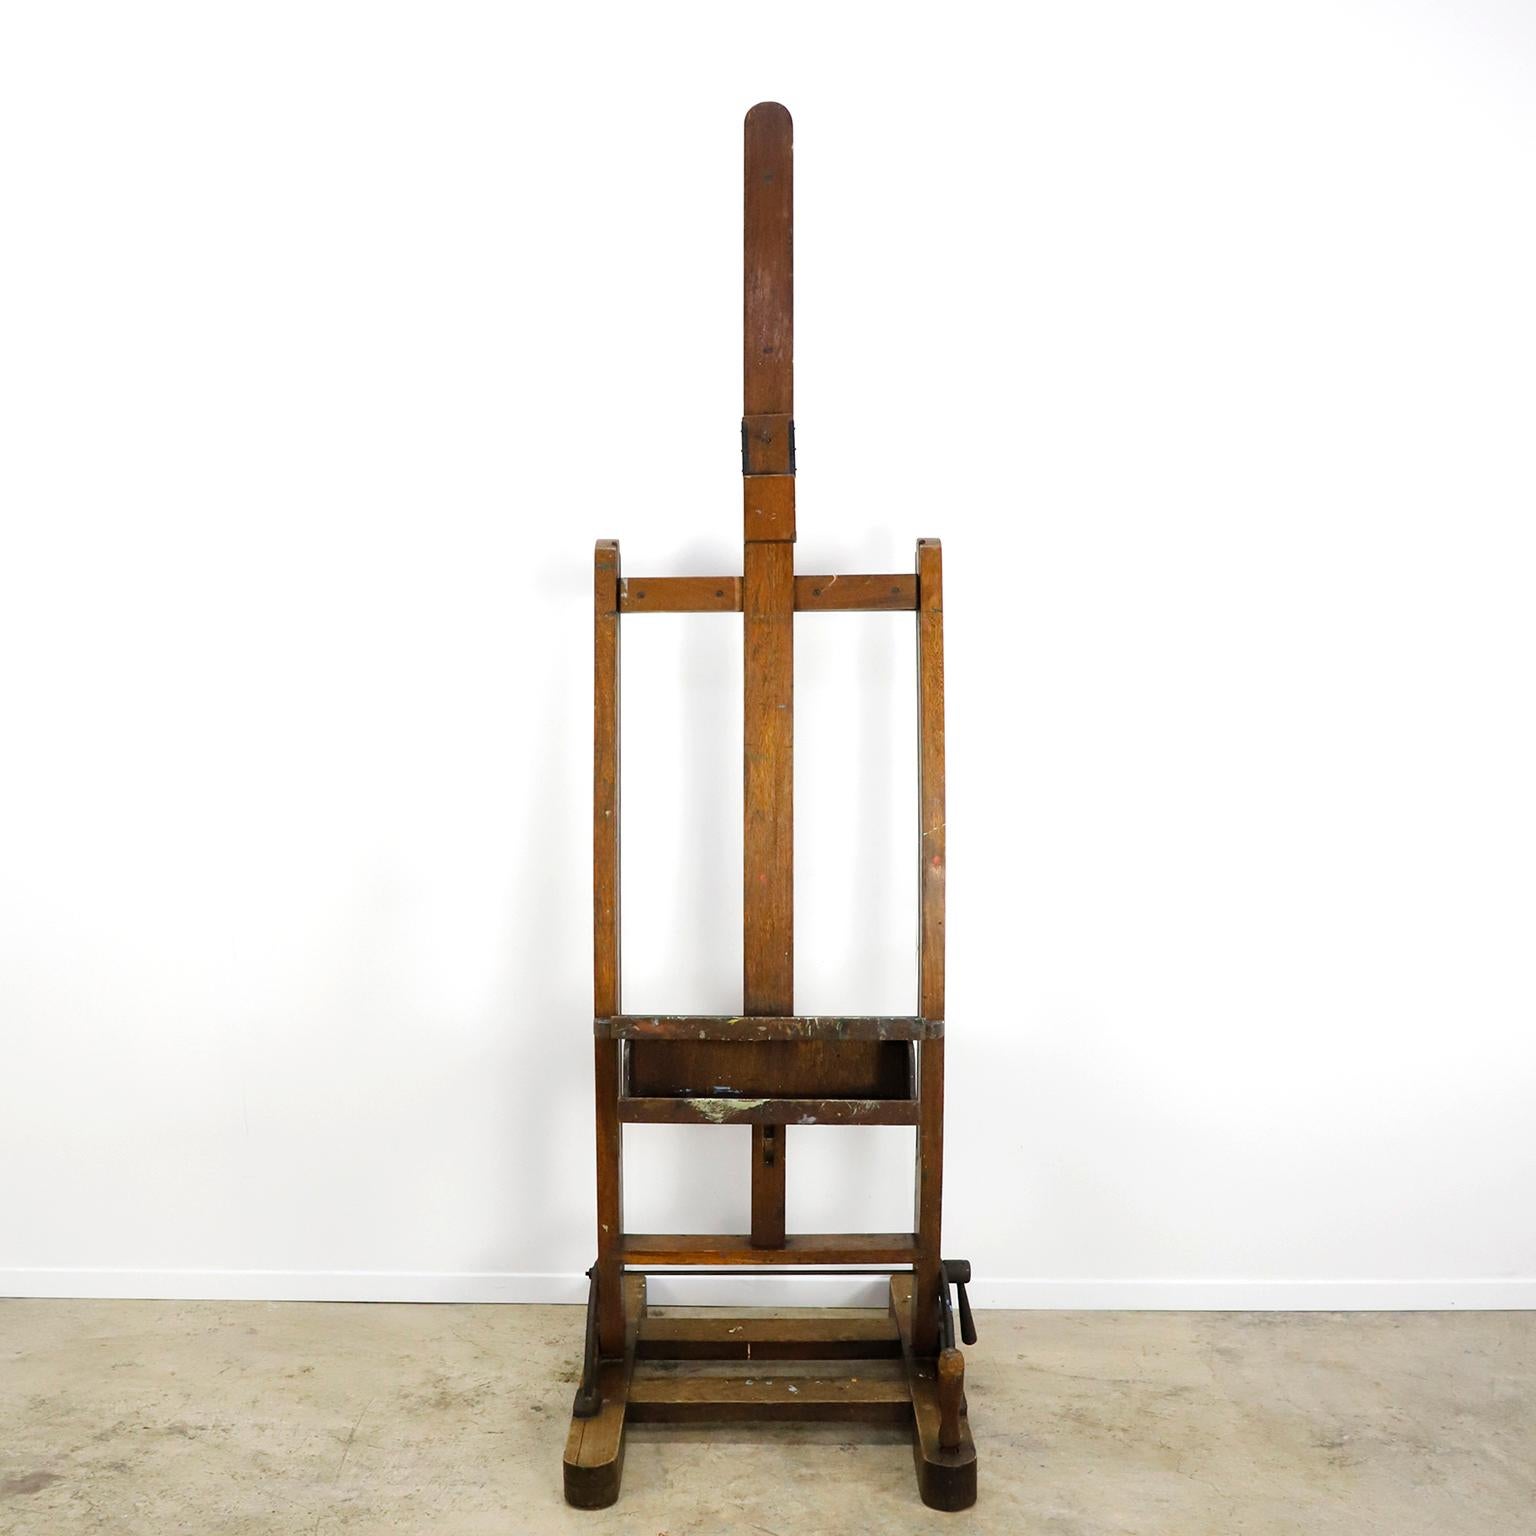 Circa 1950, we offer this Rare Mexican wood adjustable Artist Easel, made in tropical wood. This easel has the same design as those currently in the study of Diego Rivera and Frida Kahlo, ready for the next Frida Kahlo! Height is adjustable.